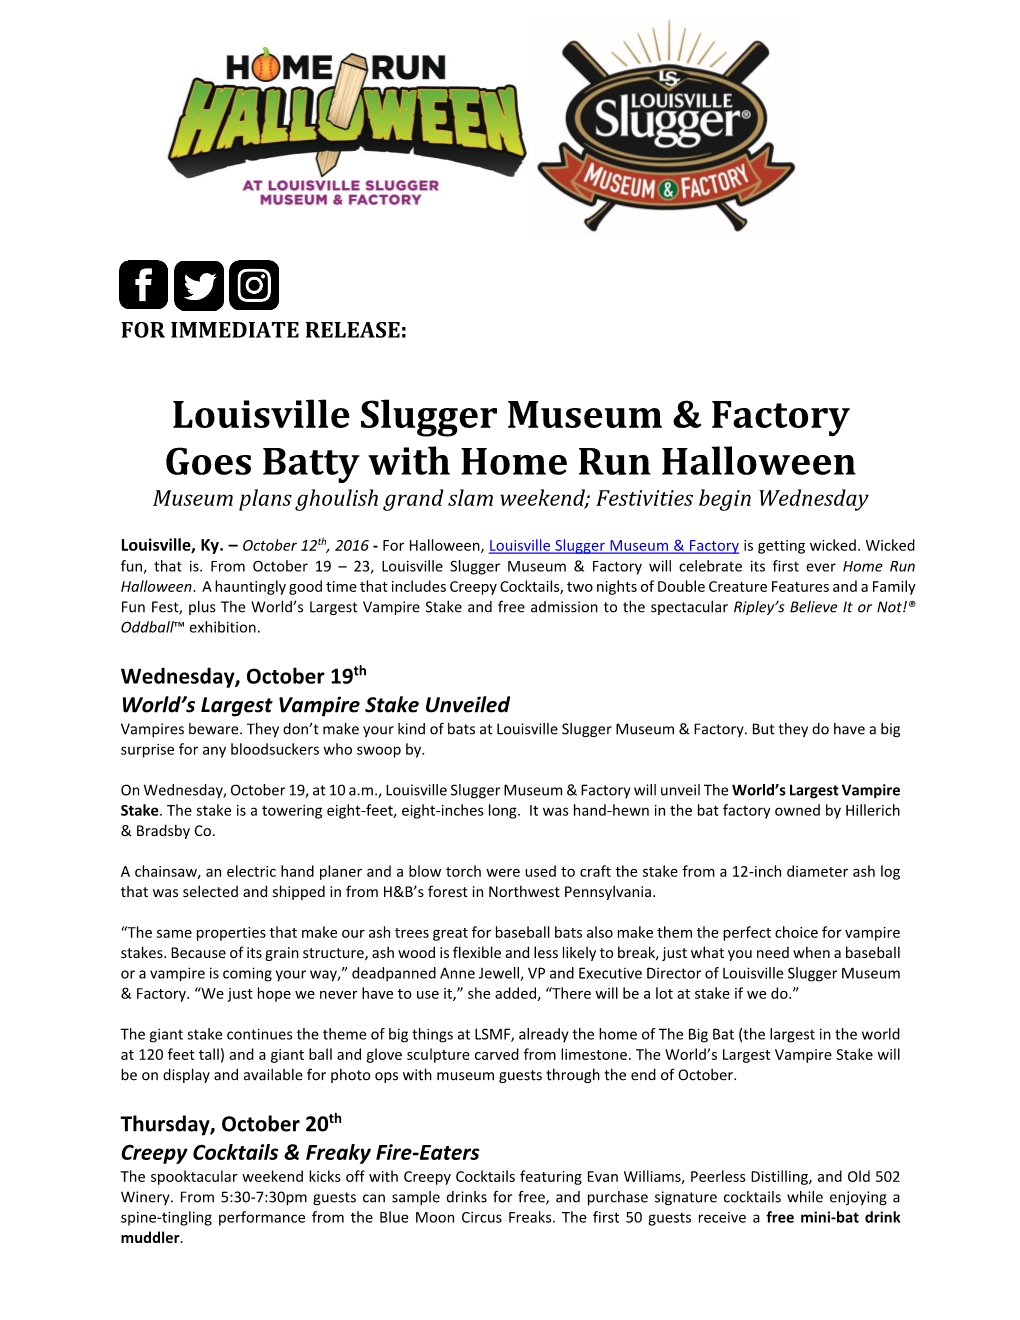 Louisville Slugger Museum & Factory Goes Batty with Home Run